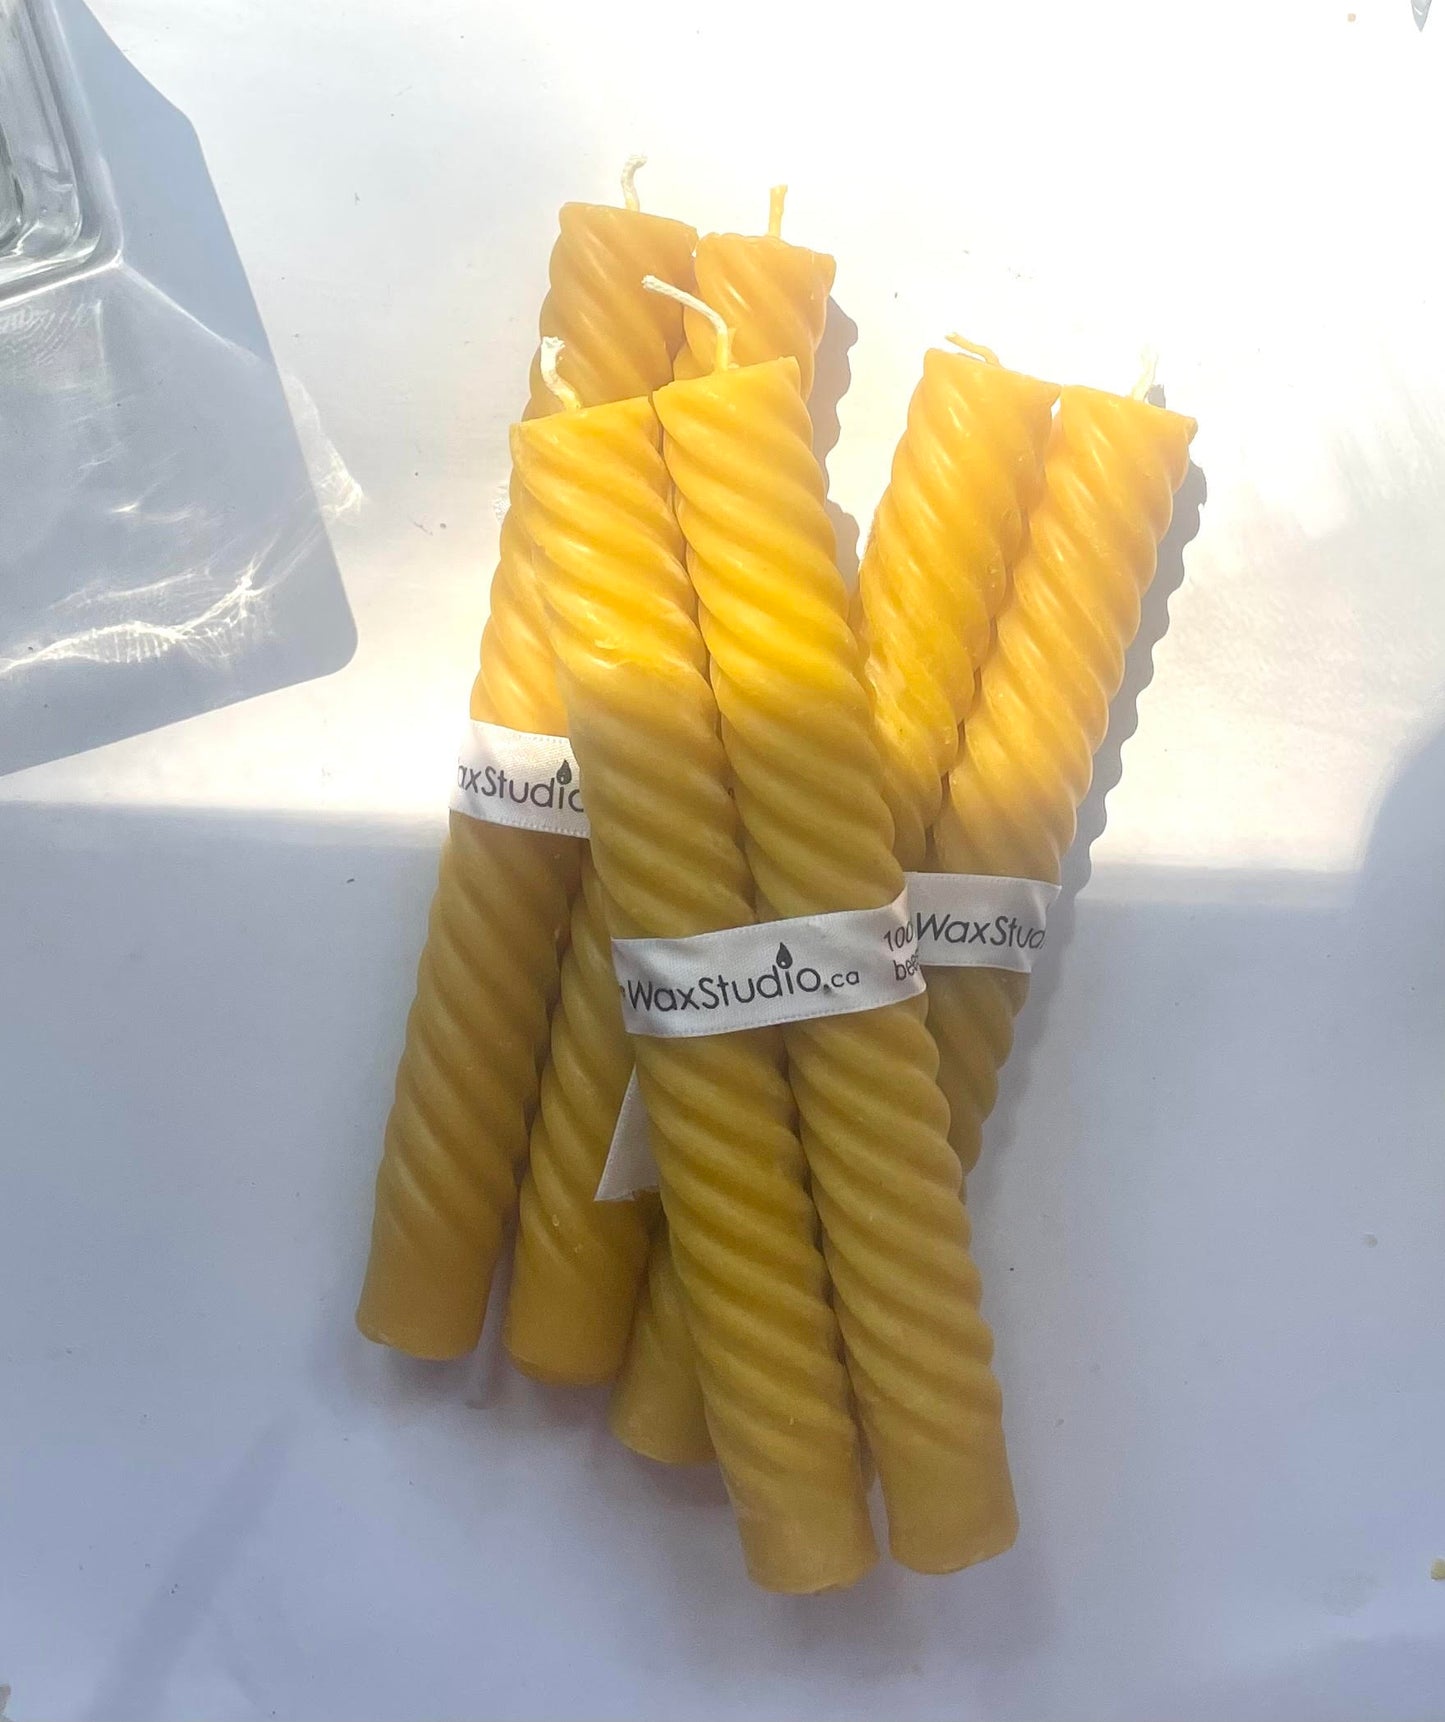 Spiral Tapers in Pure Beeswax - Pair of Two 8" - Beeswax Tapers - Candles - Beeswax Candles, Twisted Taper Candles